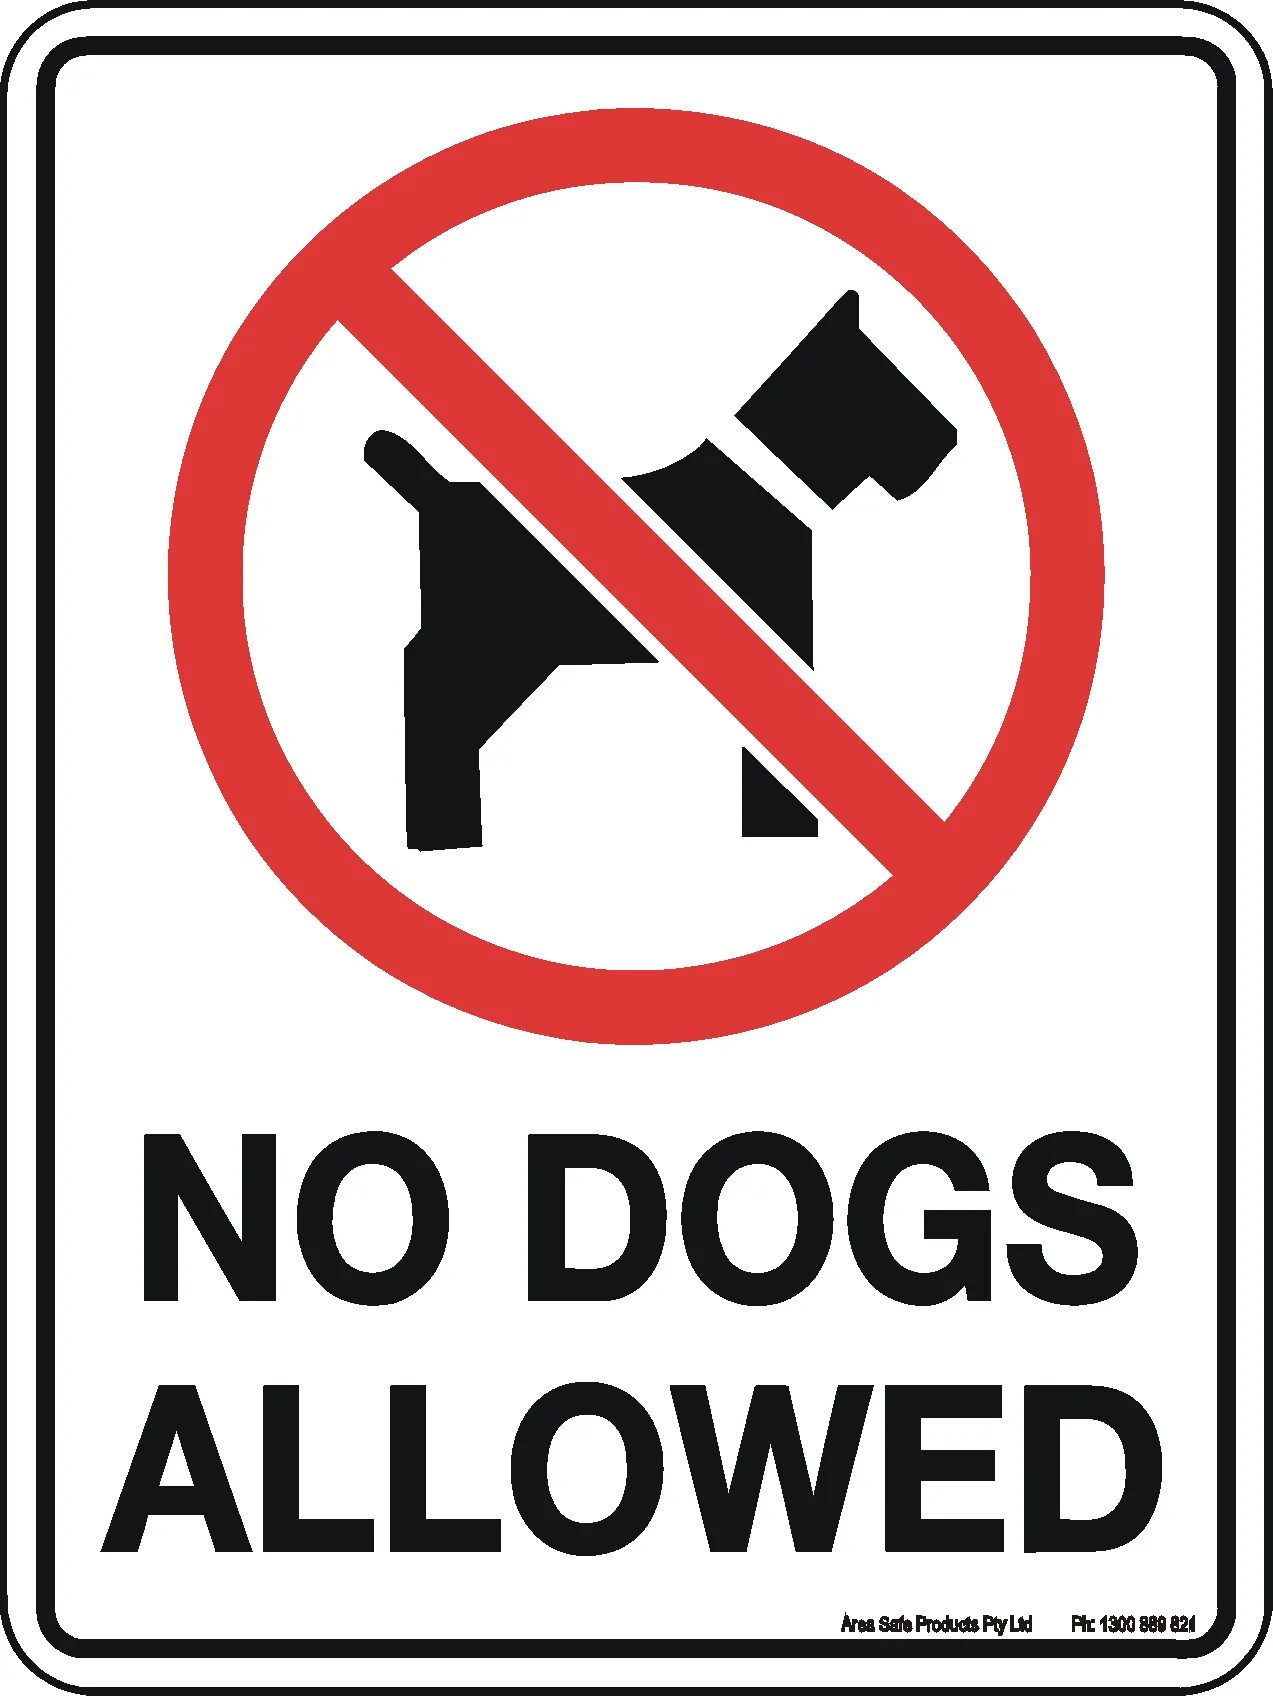 No Dogs allowed. No Dogs allowed sign. Знак Russians and Dogs are not allowed. Not allowed Dog. It s not allowed